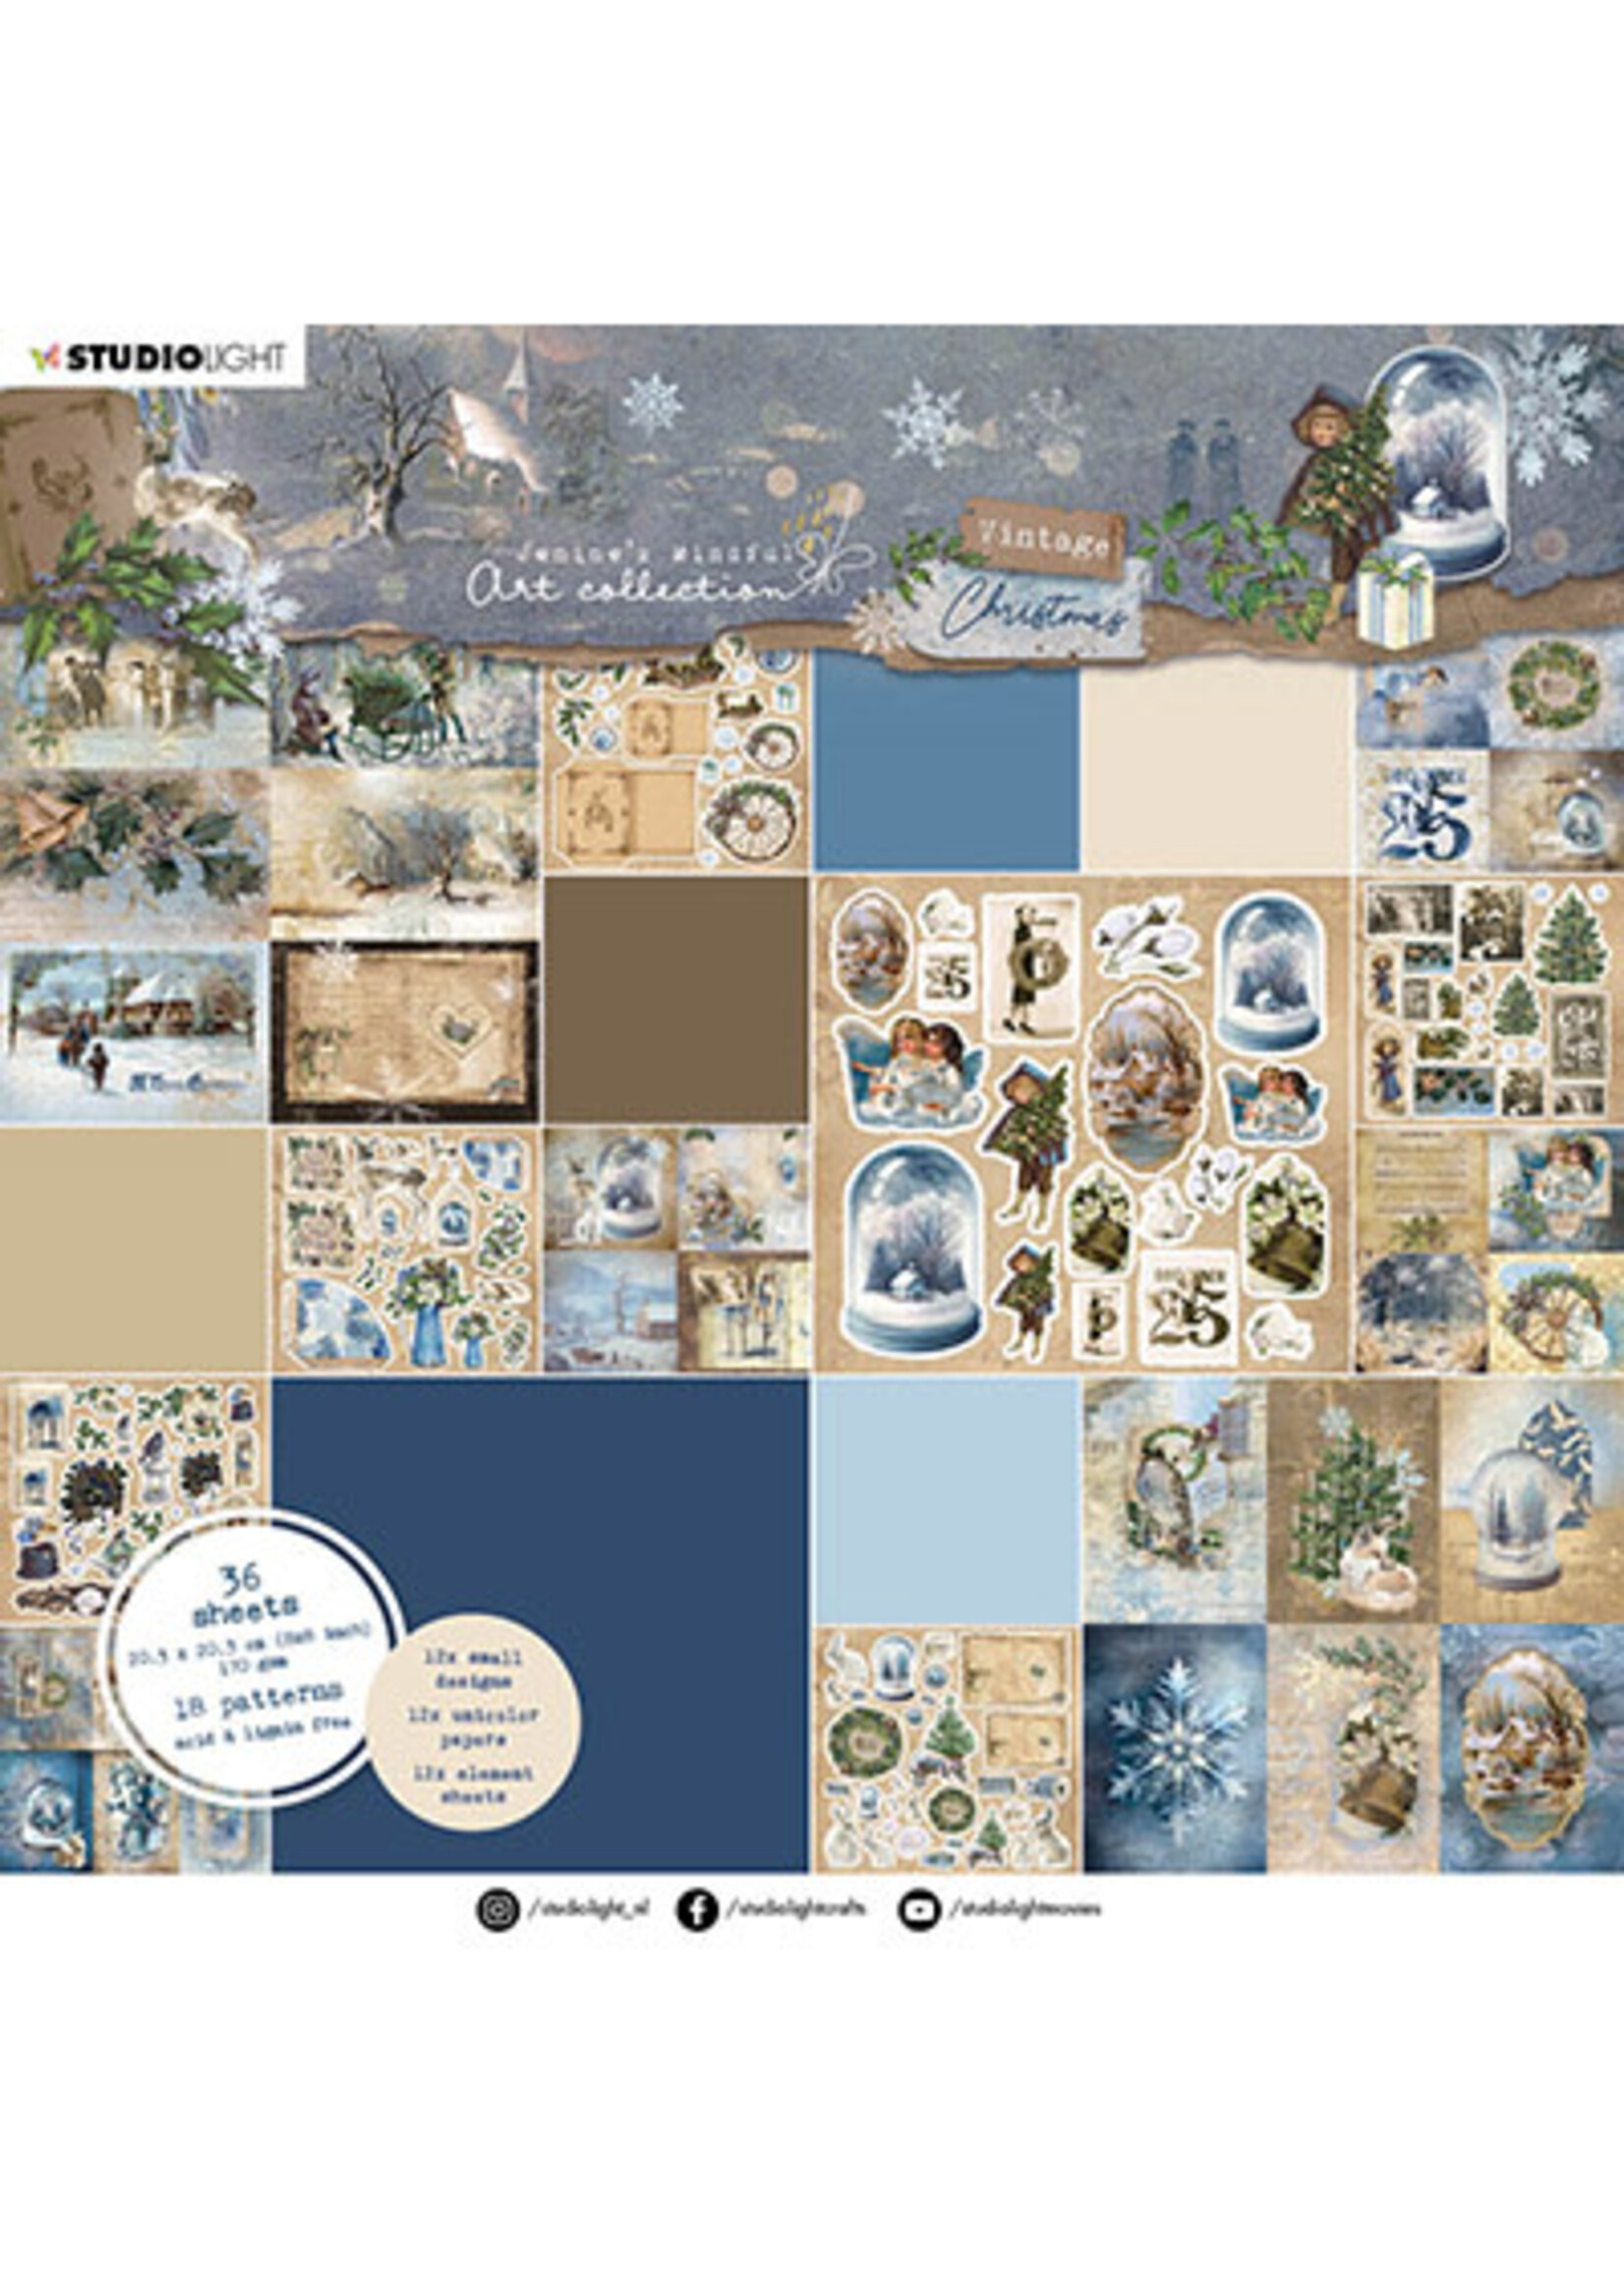 Jenine's Mindfull Collectie JMA-VC-PP115 - Small Designs & Elements Vintage Christmas nr.115